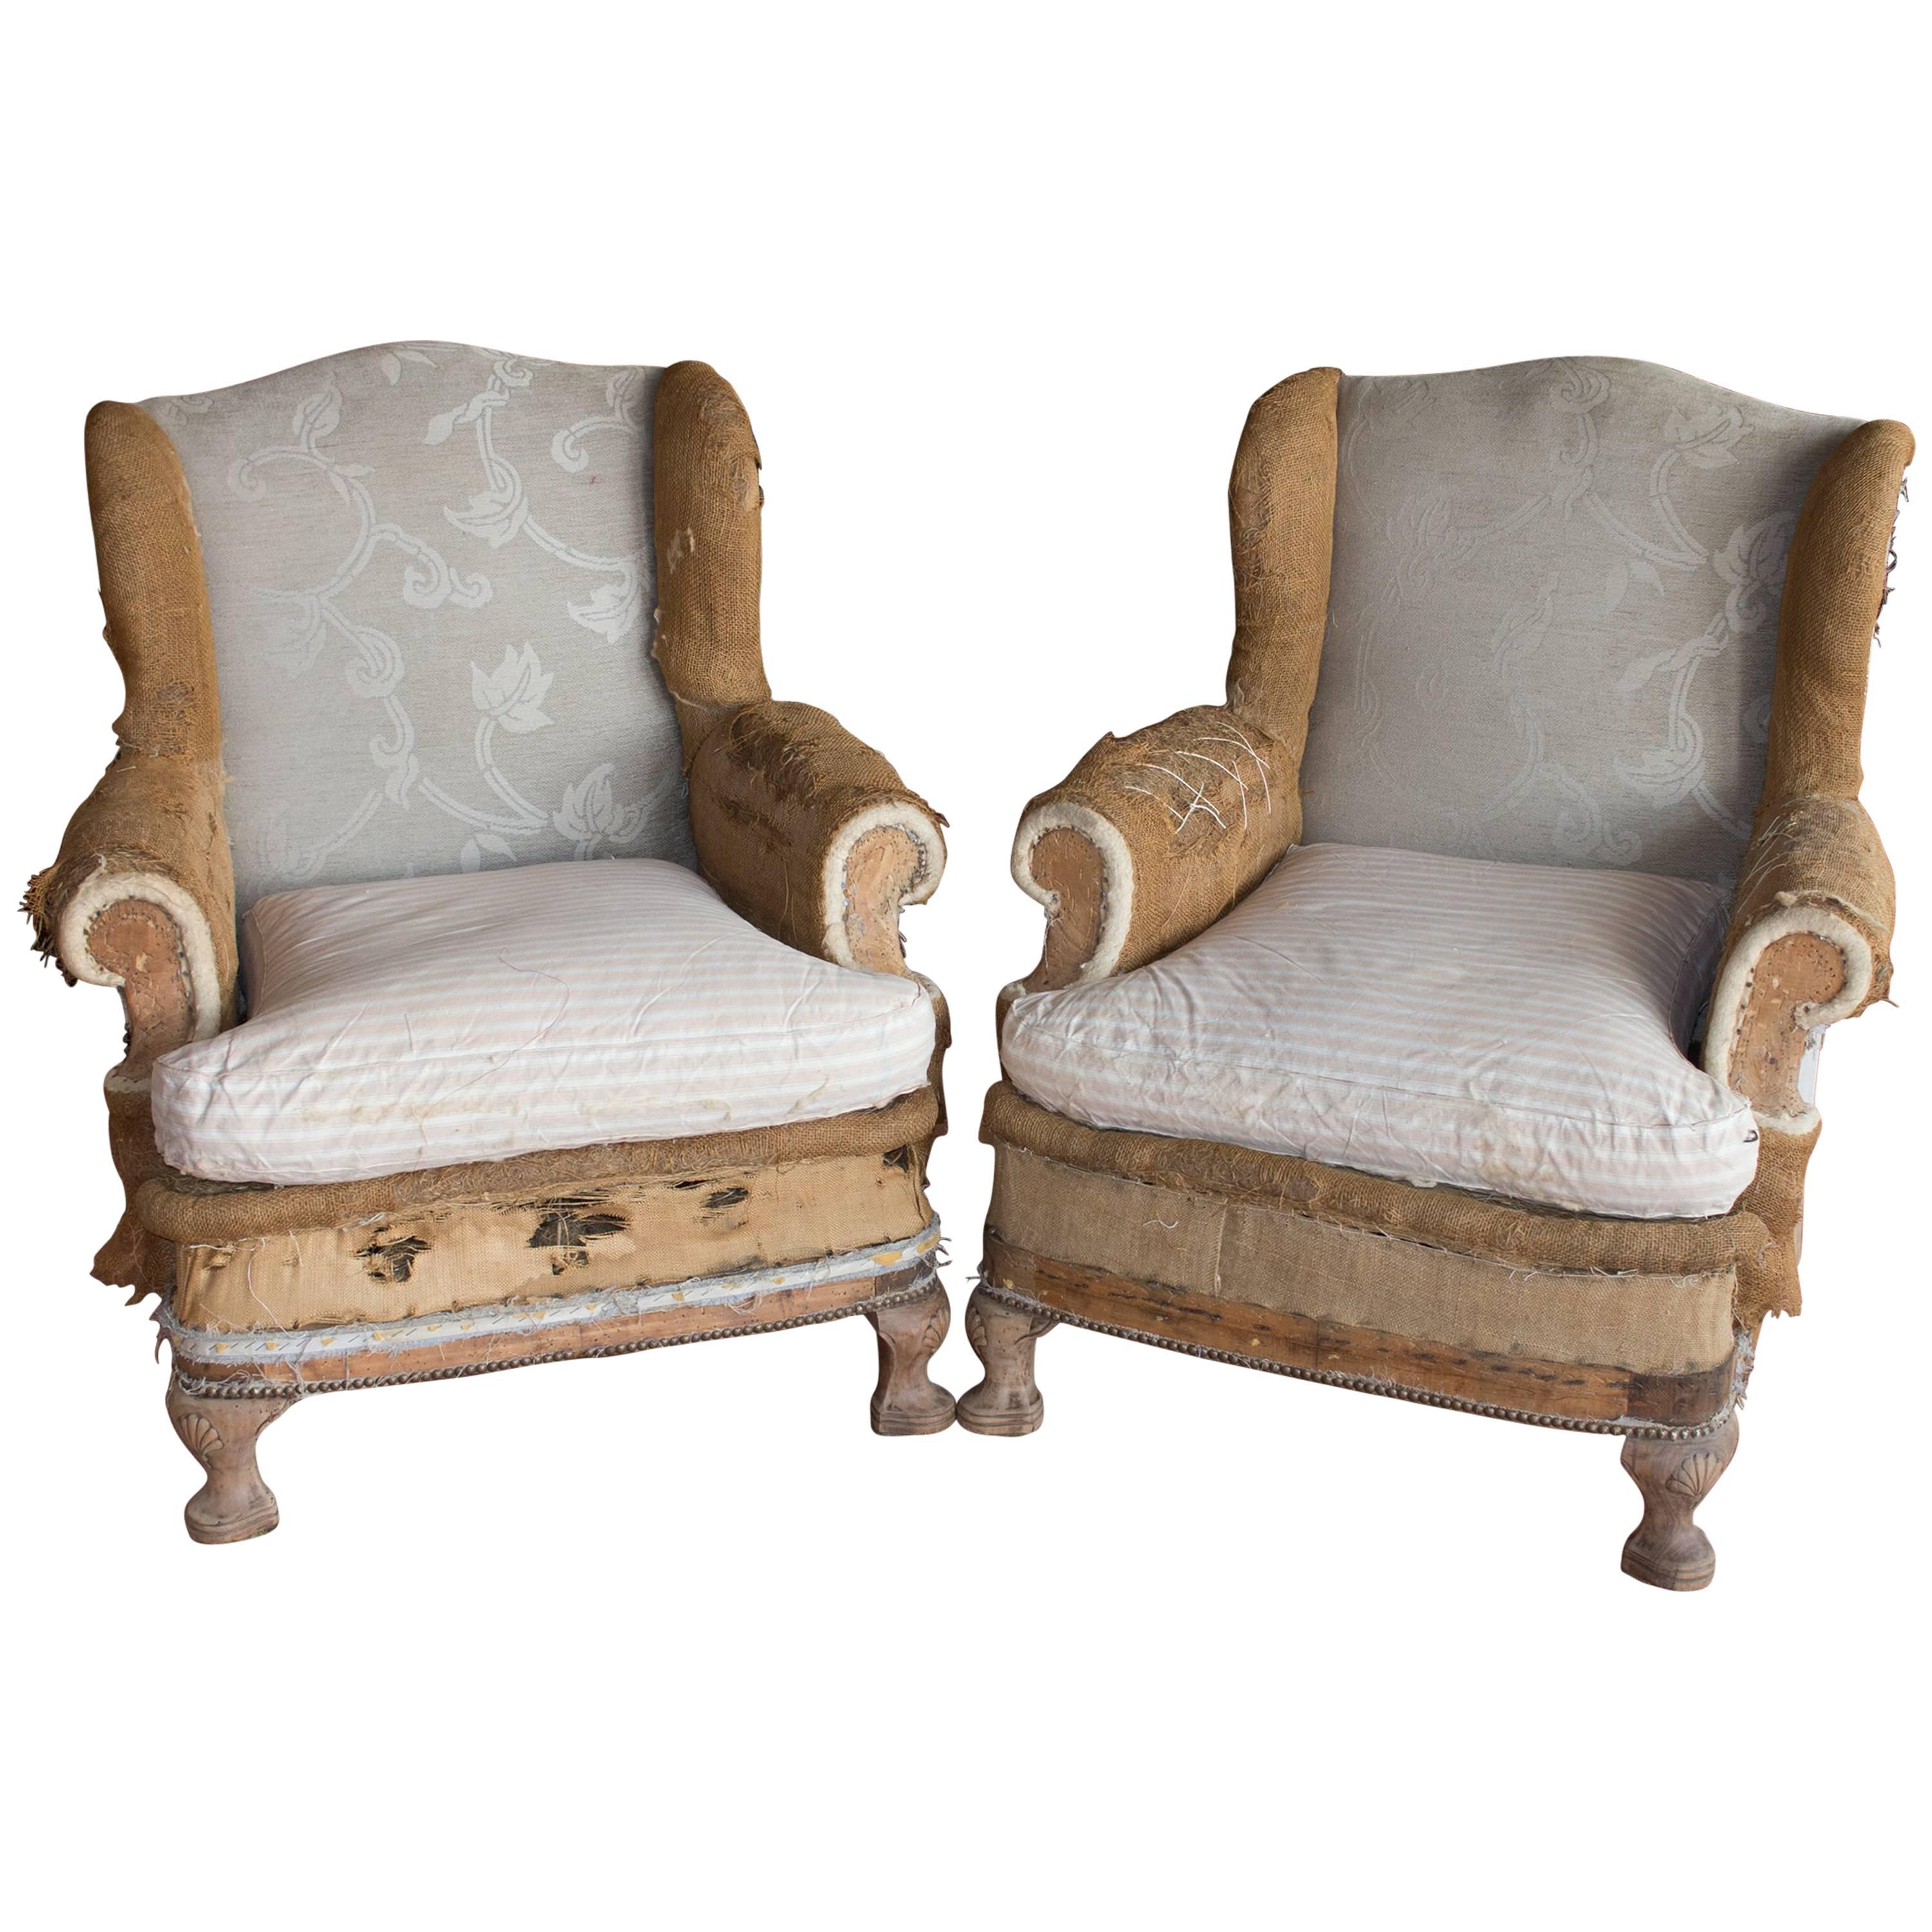 Pair of Antique Queen Anne Deconstructed Wingback Chairs